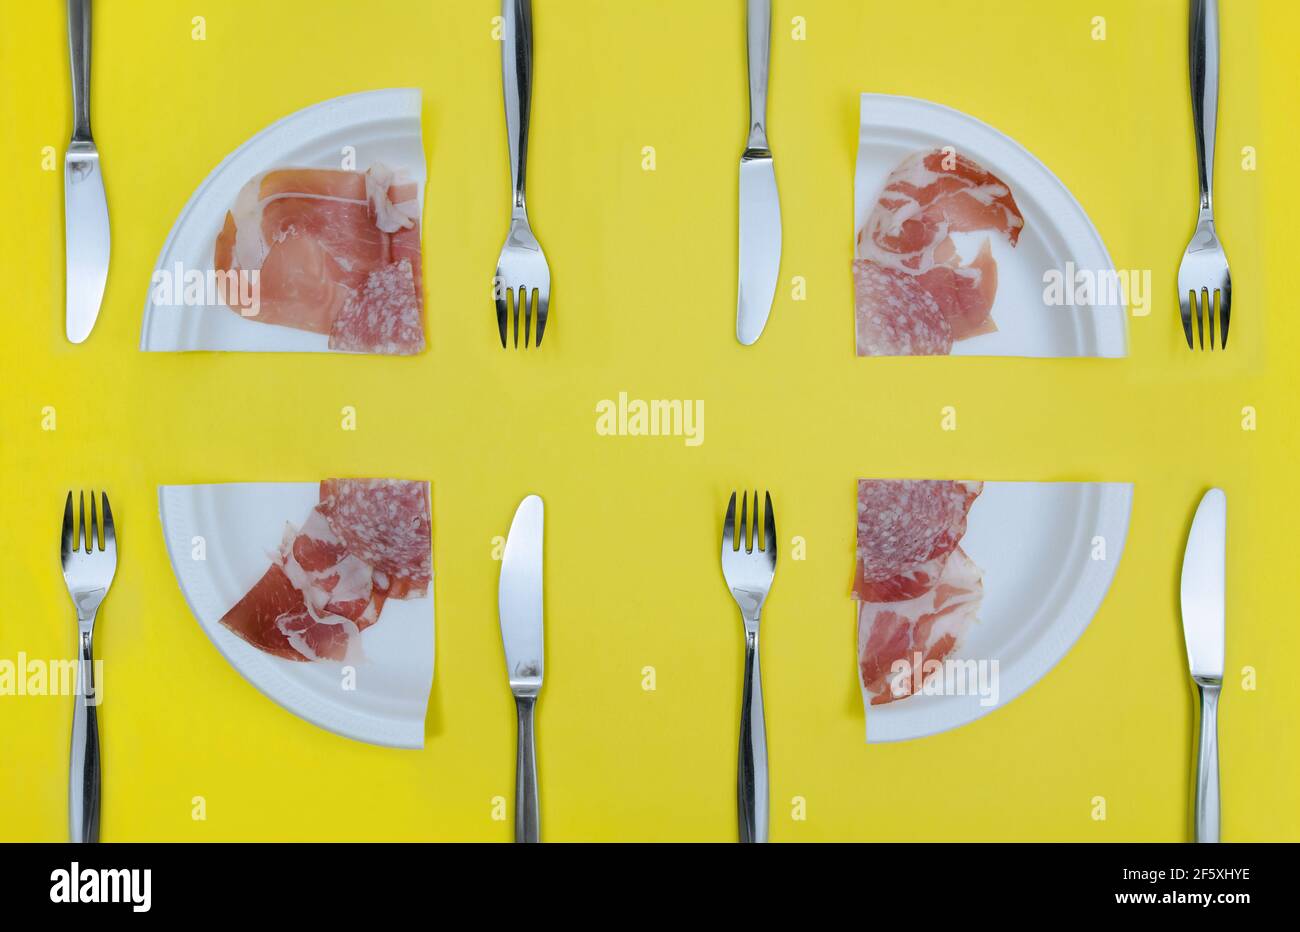 Cut portions of Antipasto misto. On a yellow surface, four table services made of four quarters of deli meat plates.. Stock Photo